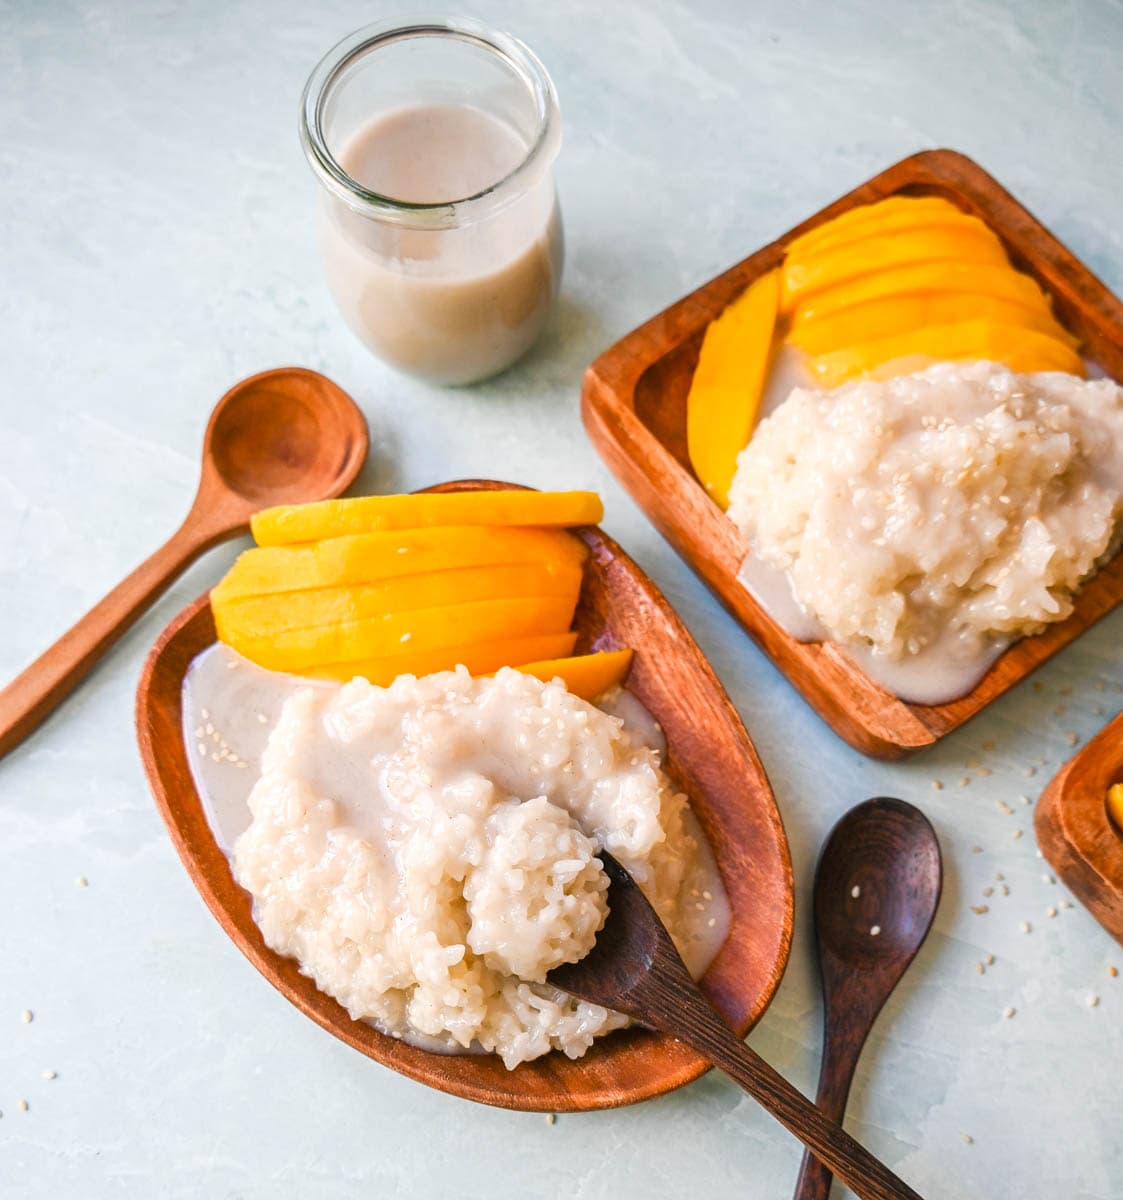 Quick, easy, and perfectly sweet homemade sticky rice with fresh mango. How to make this famous Thai mango sticky rice dessert with simple ingredients.